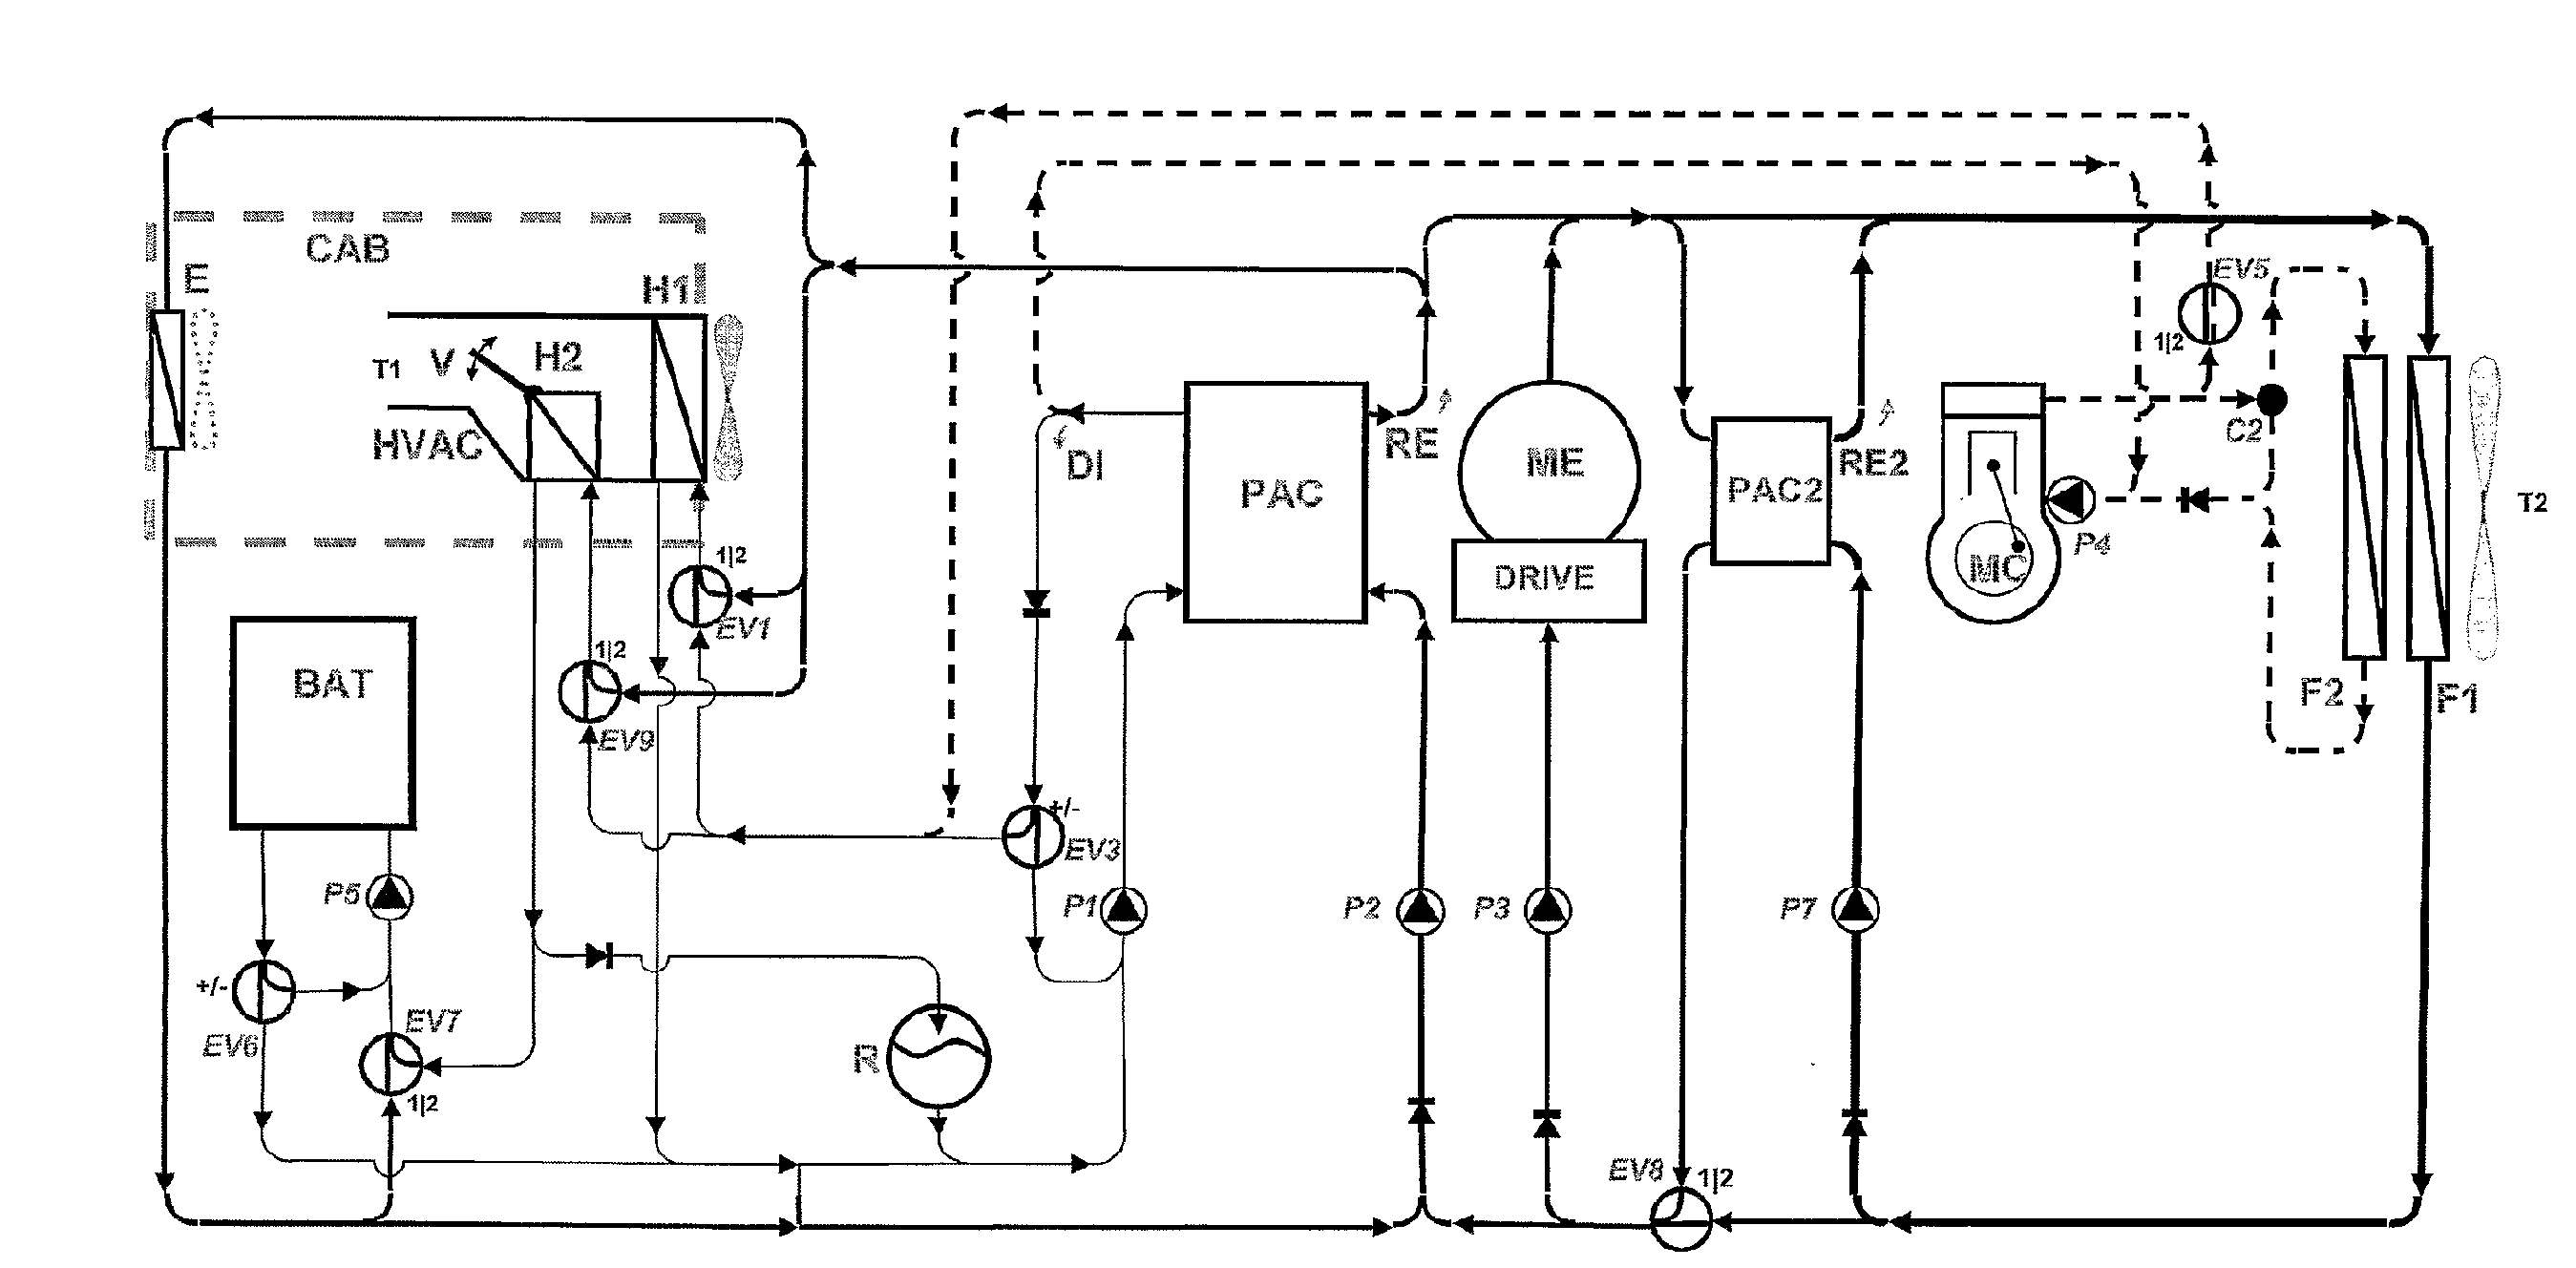 Electrical or hybrid motor vehicle with thermal conditioning system upgrading low-level sources